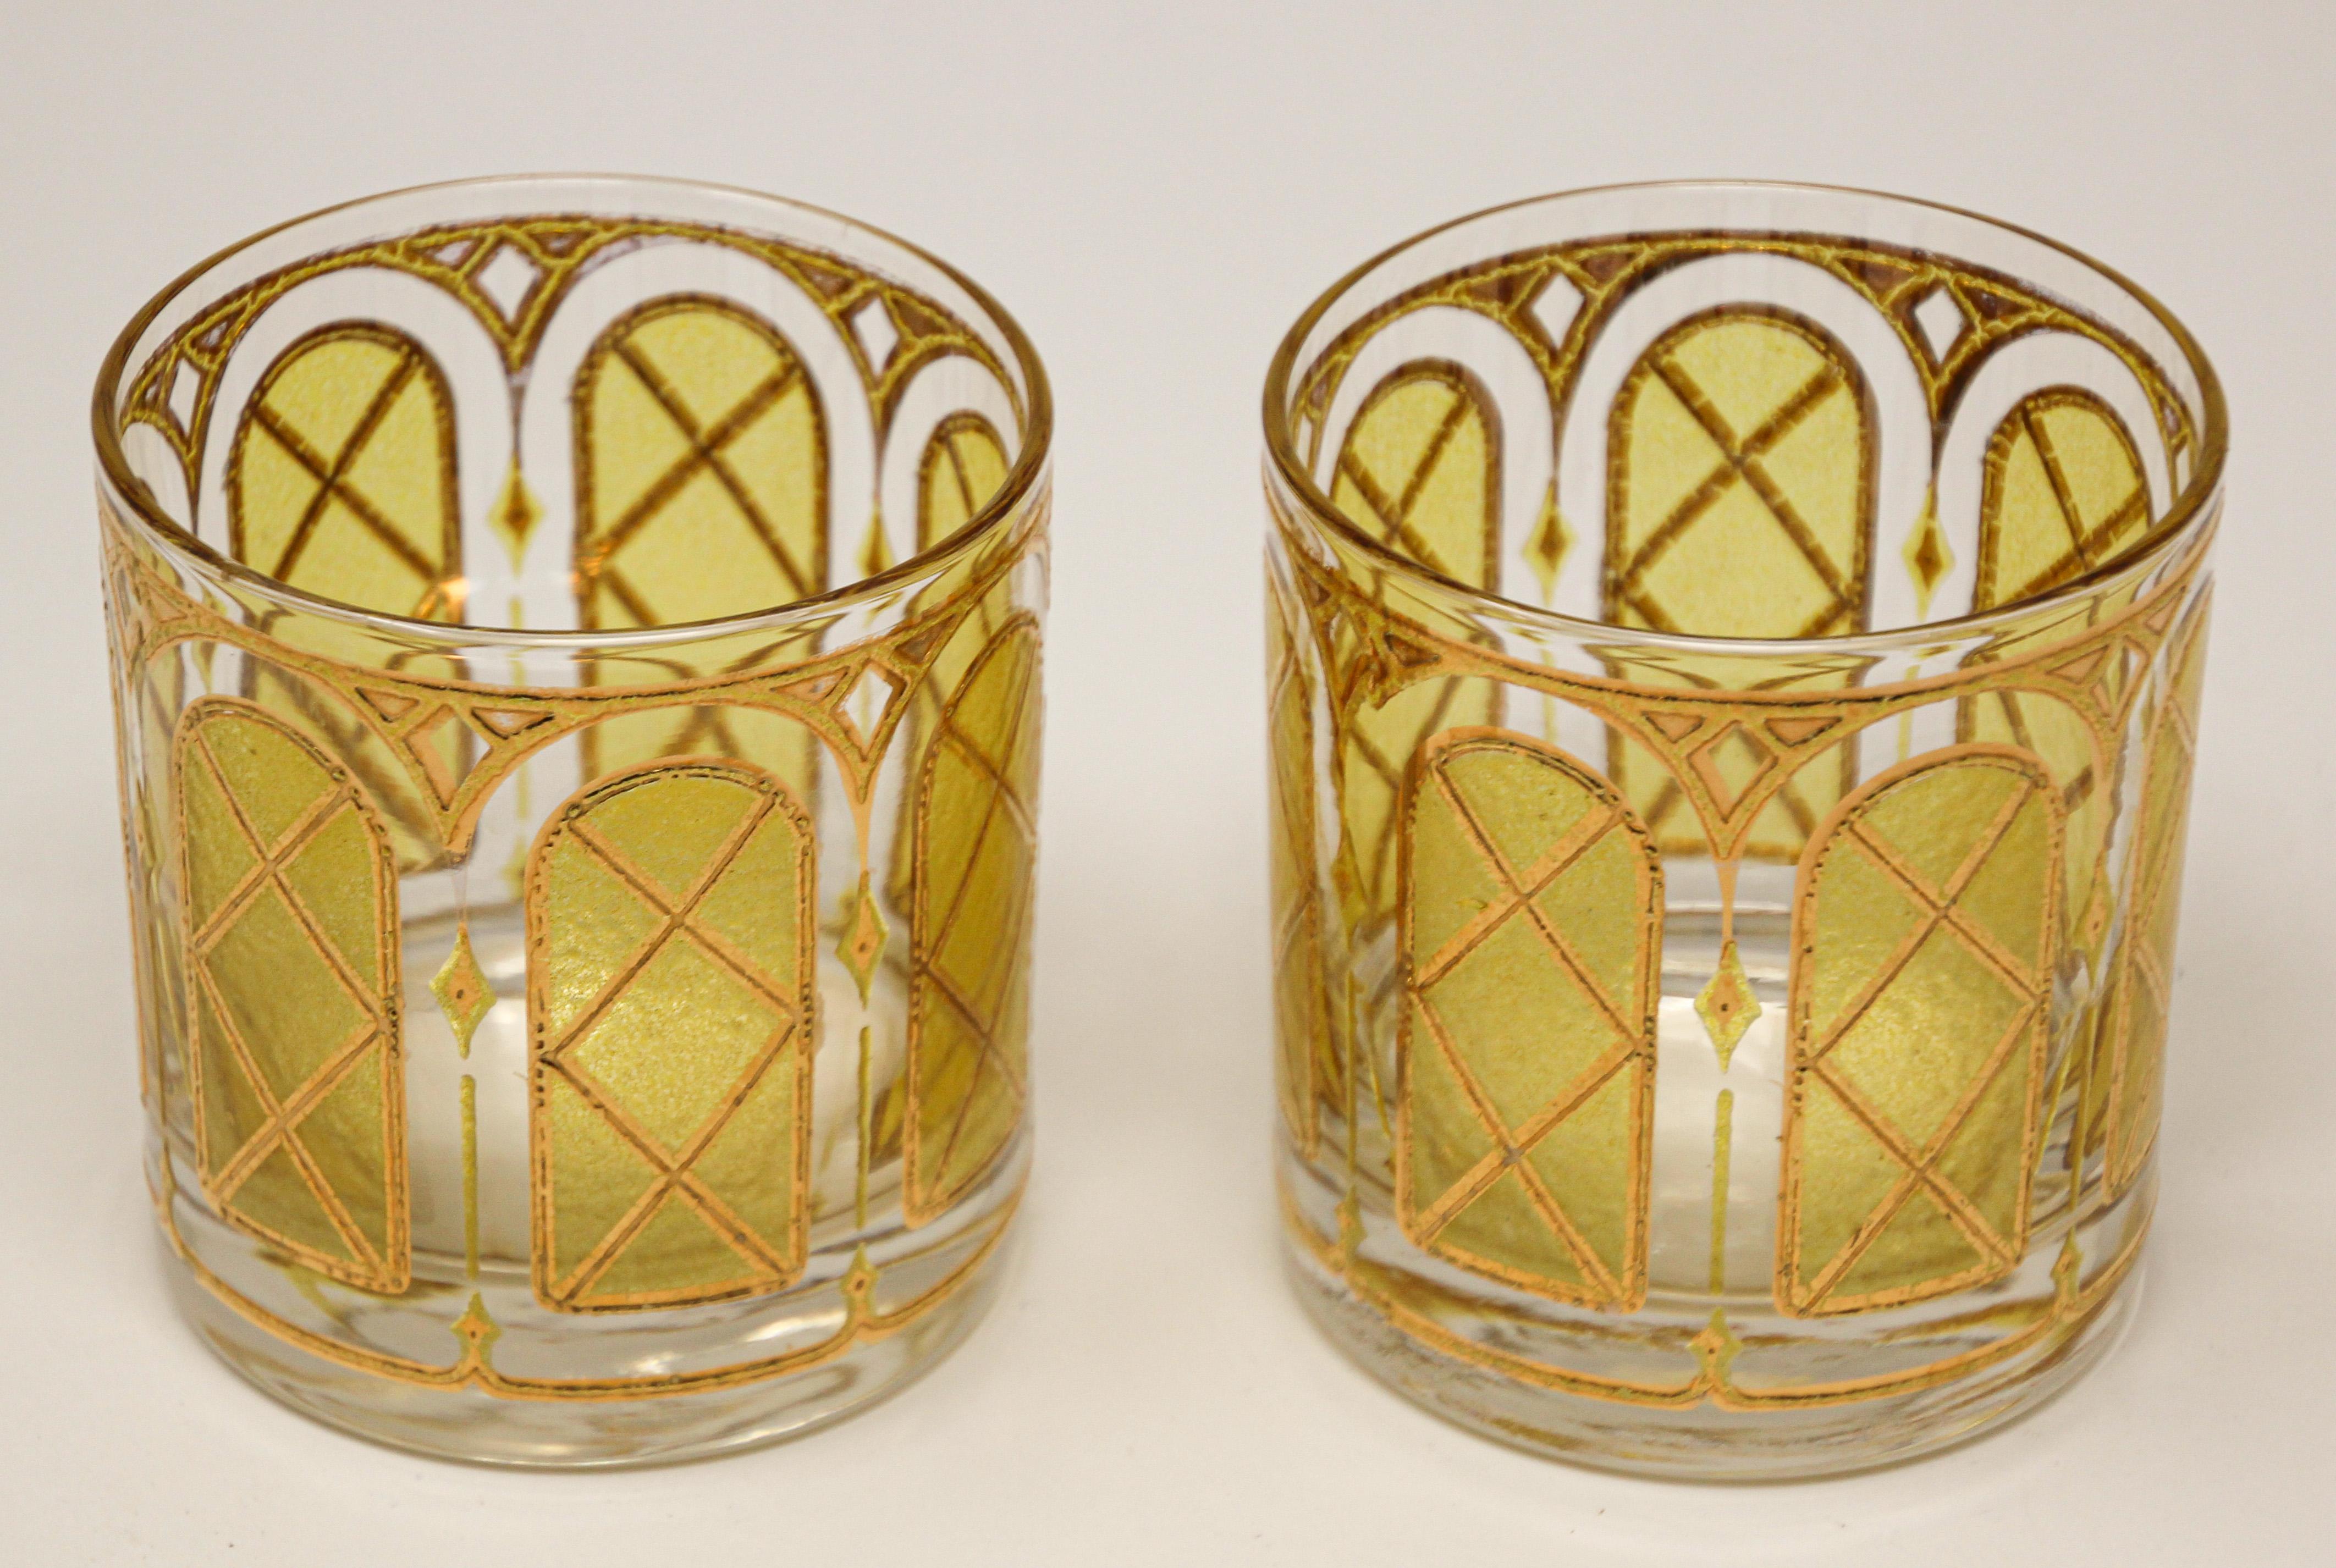 Elegant exquisite vintage set of two whiskey glasses designed by Fred Press.
The glasses are decorated with gold, vintage condition, Culver style.
Each glass:
Size: 3.5